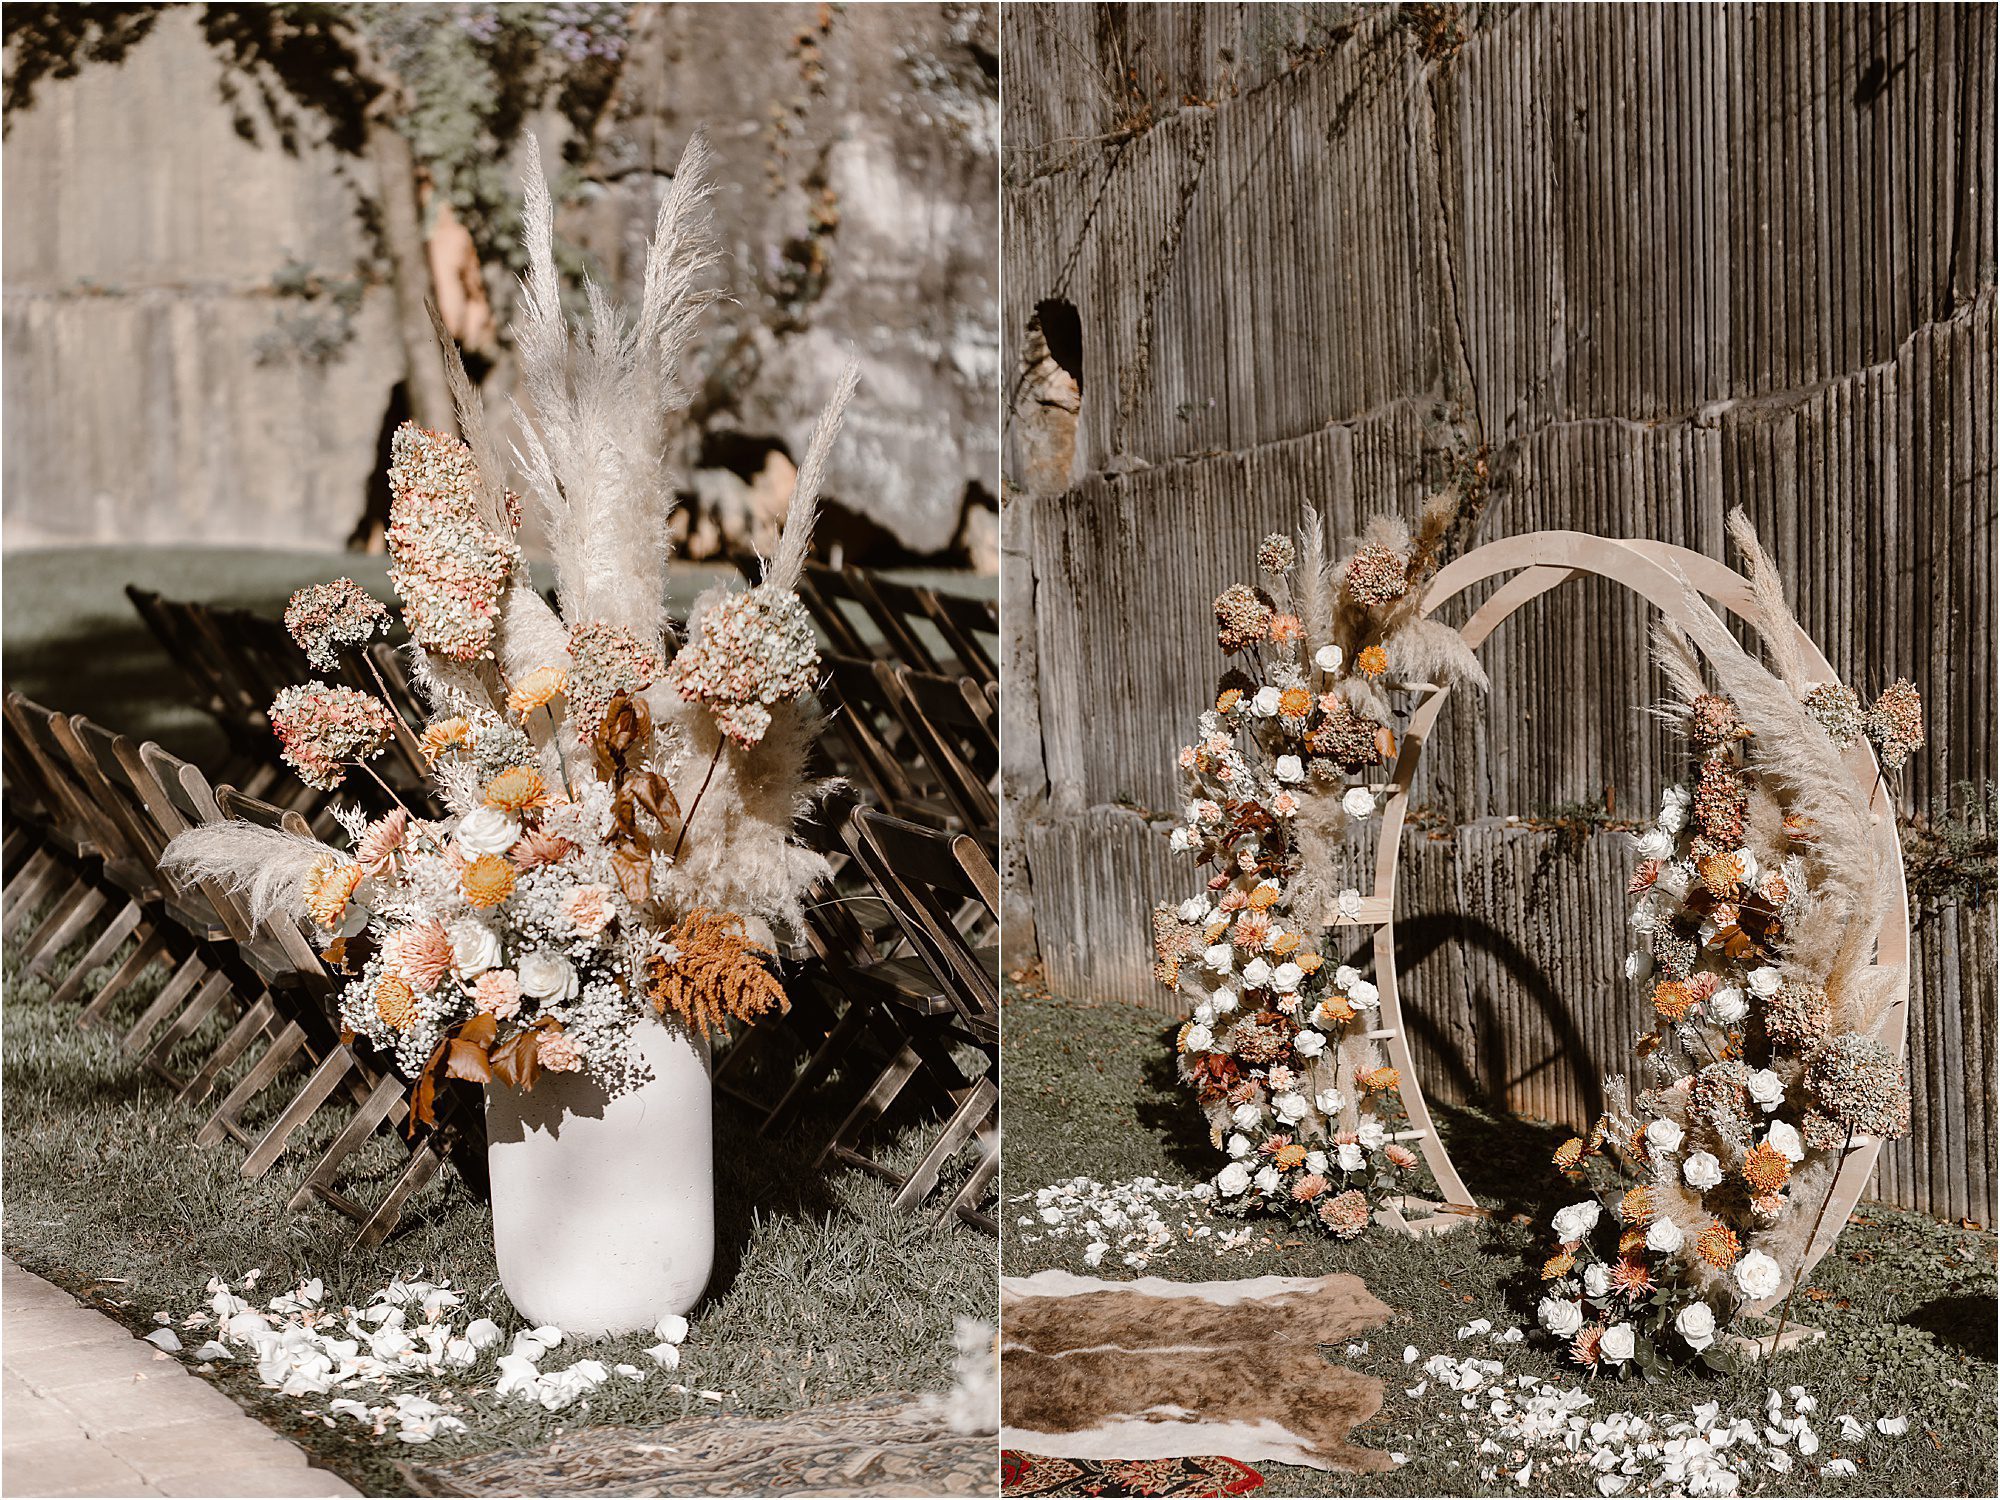 earthy autumnal wedding ceremony decorations in cream and orange flowers